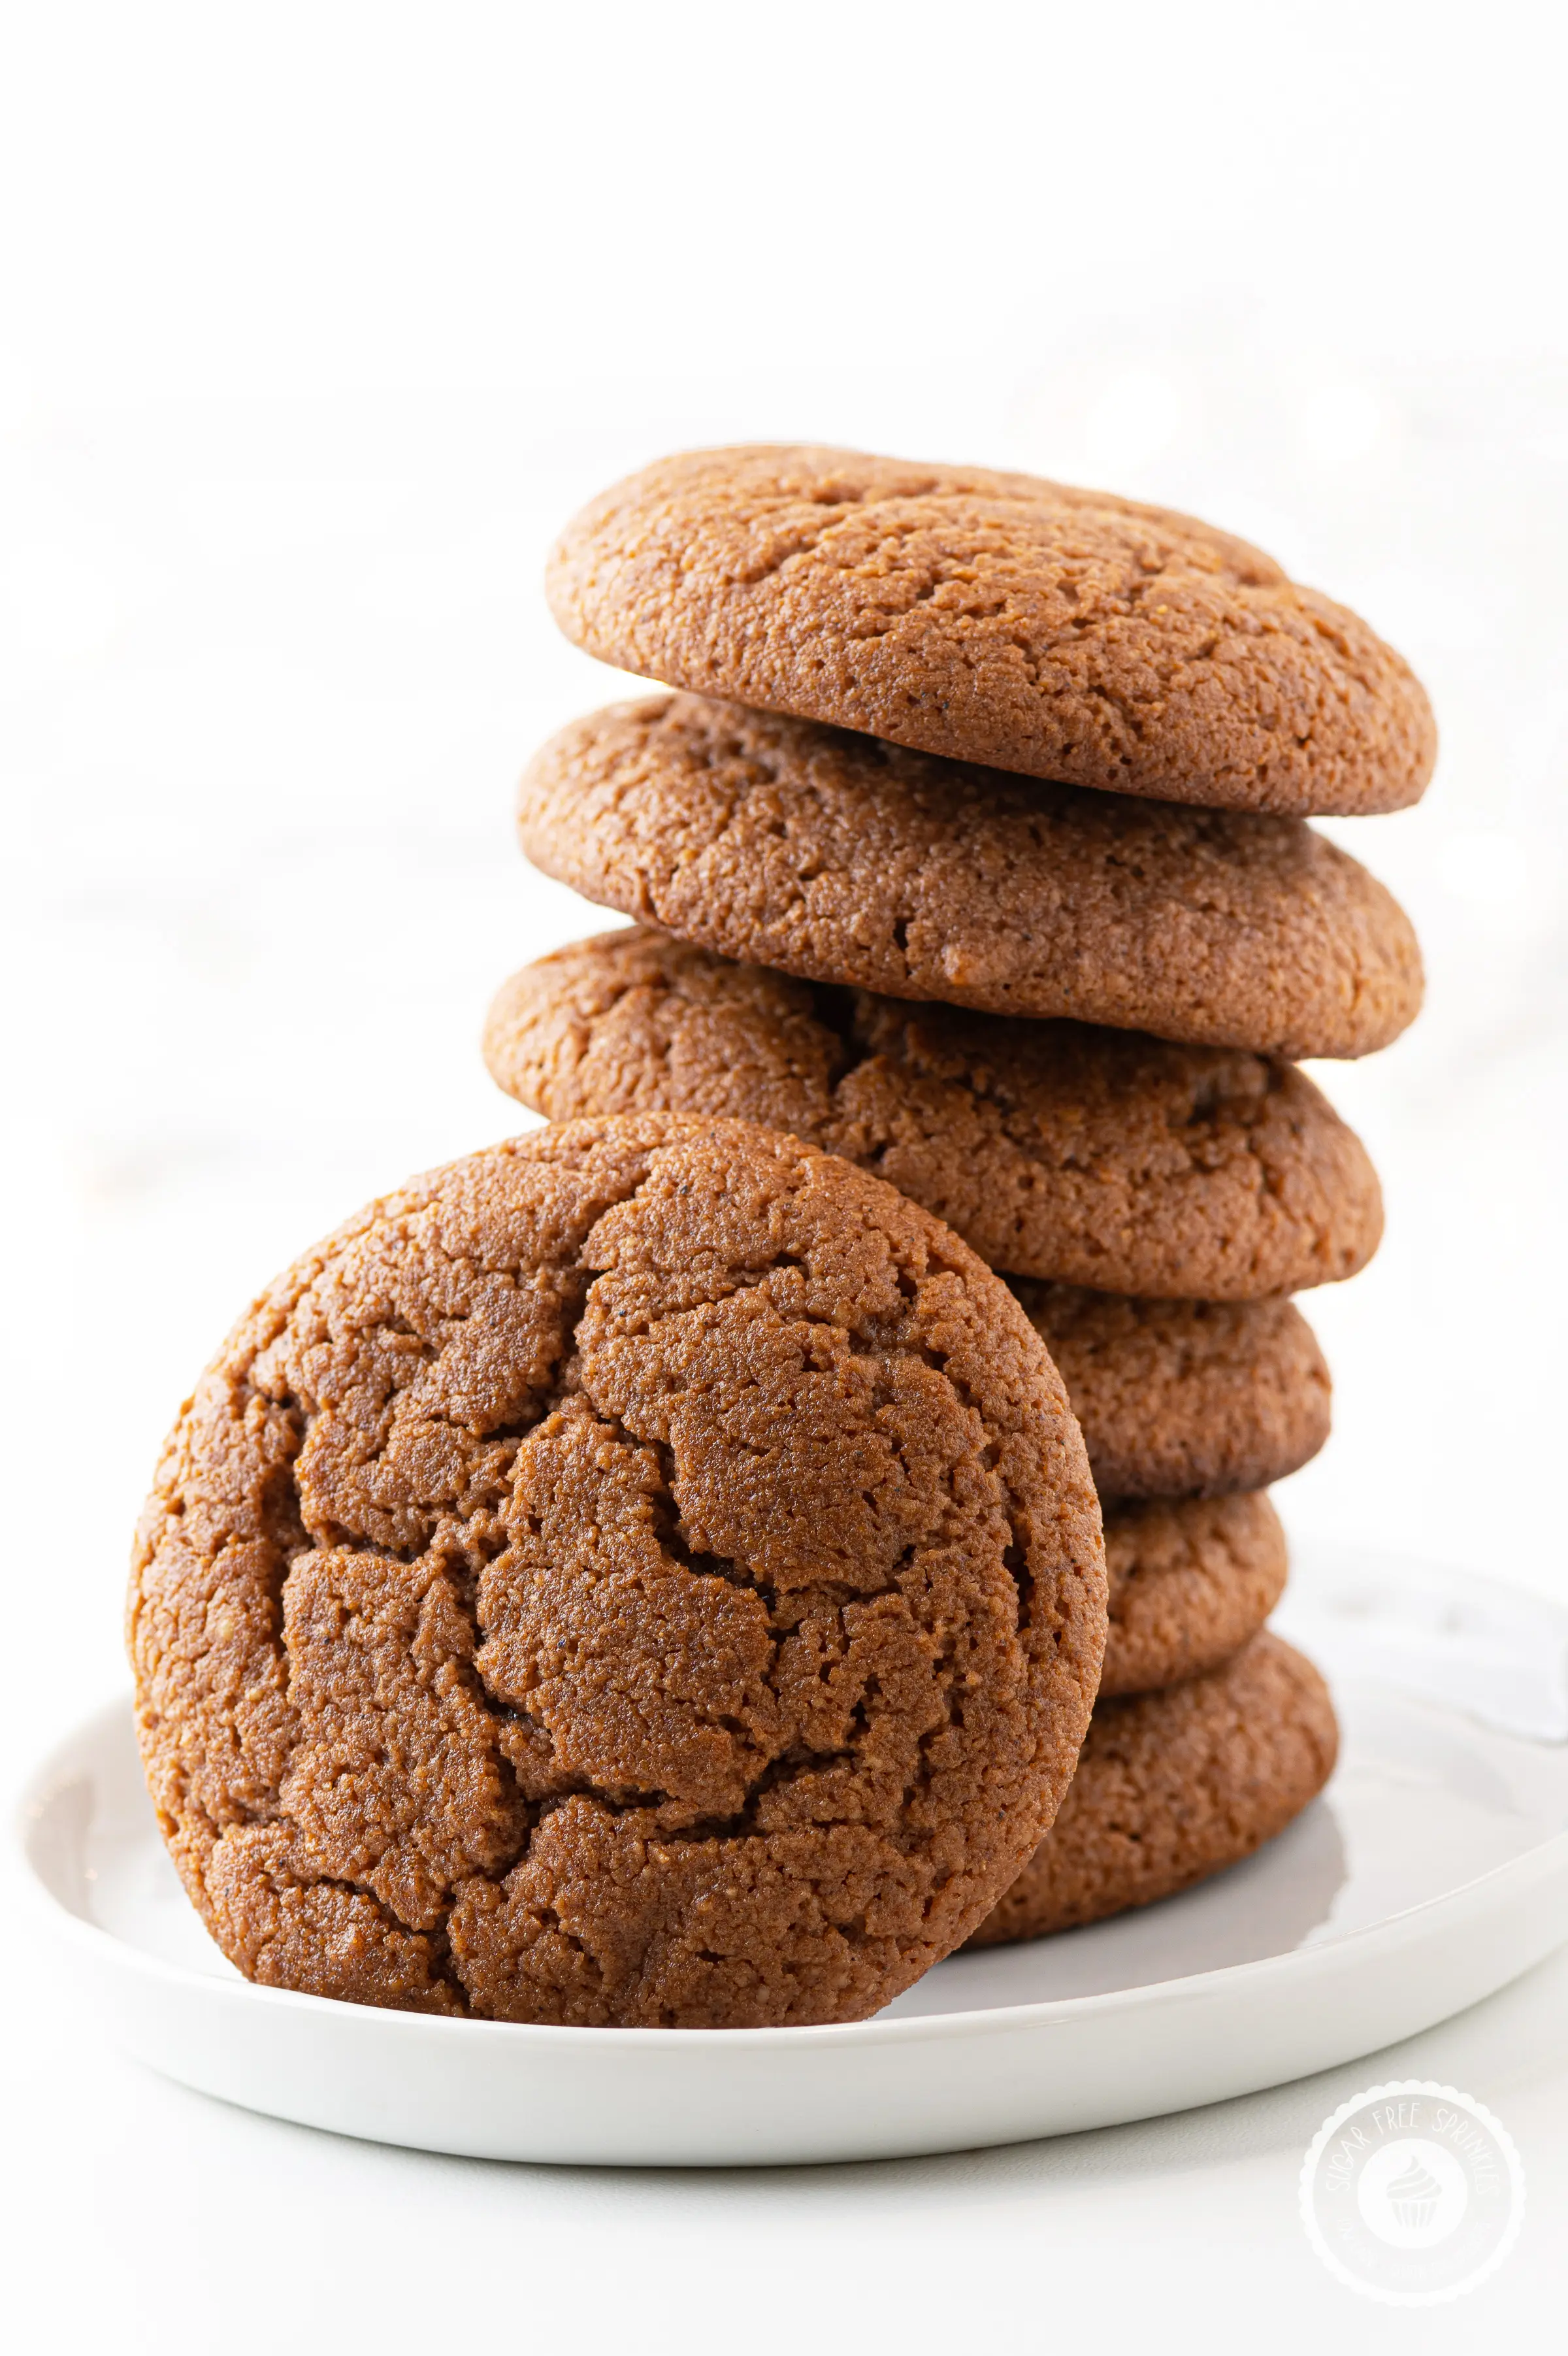 A stack of keto gingerbread cookies on a white plate against a bright white background.